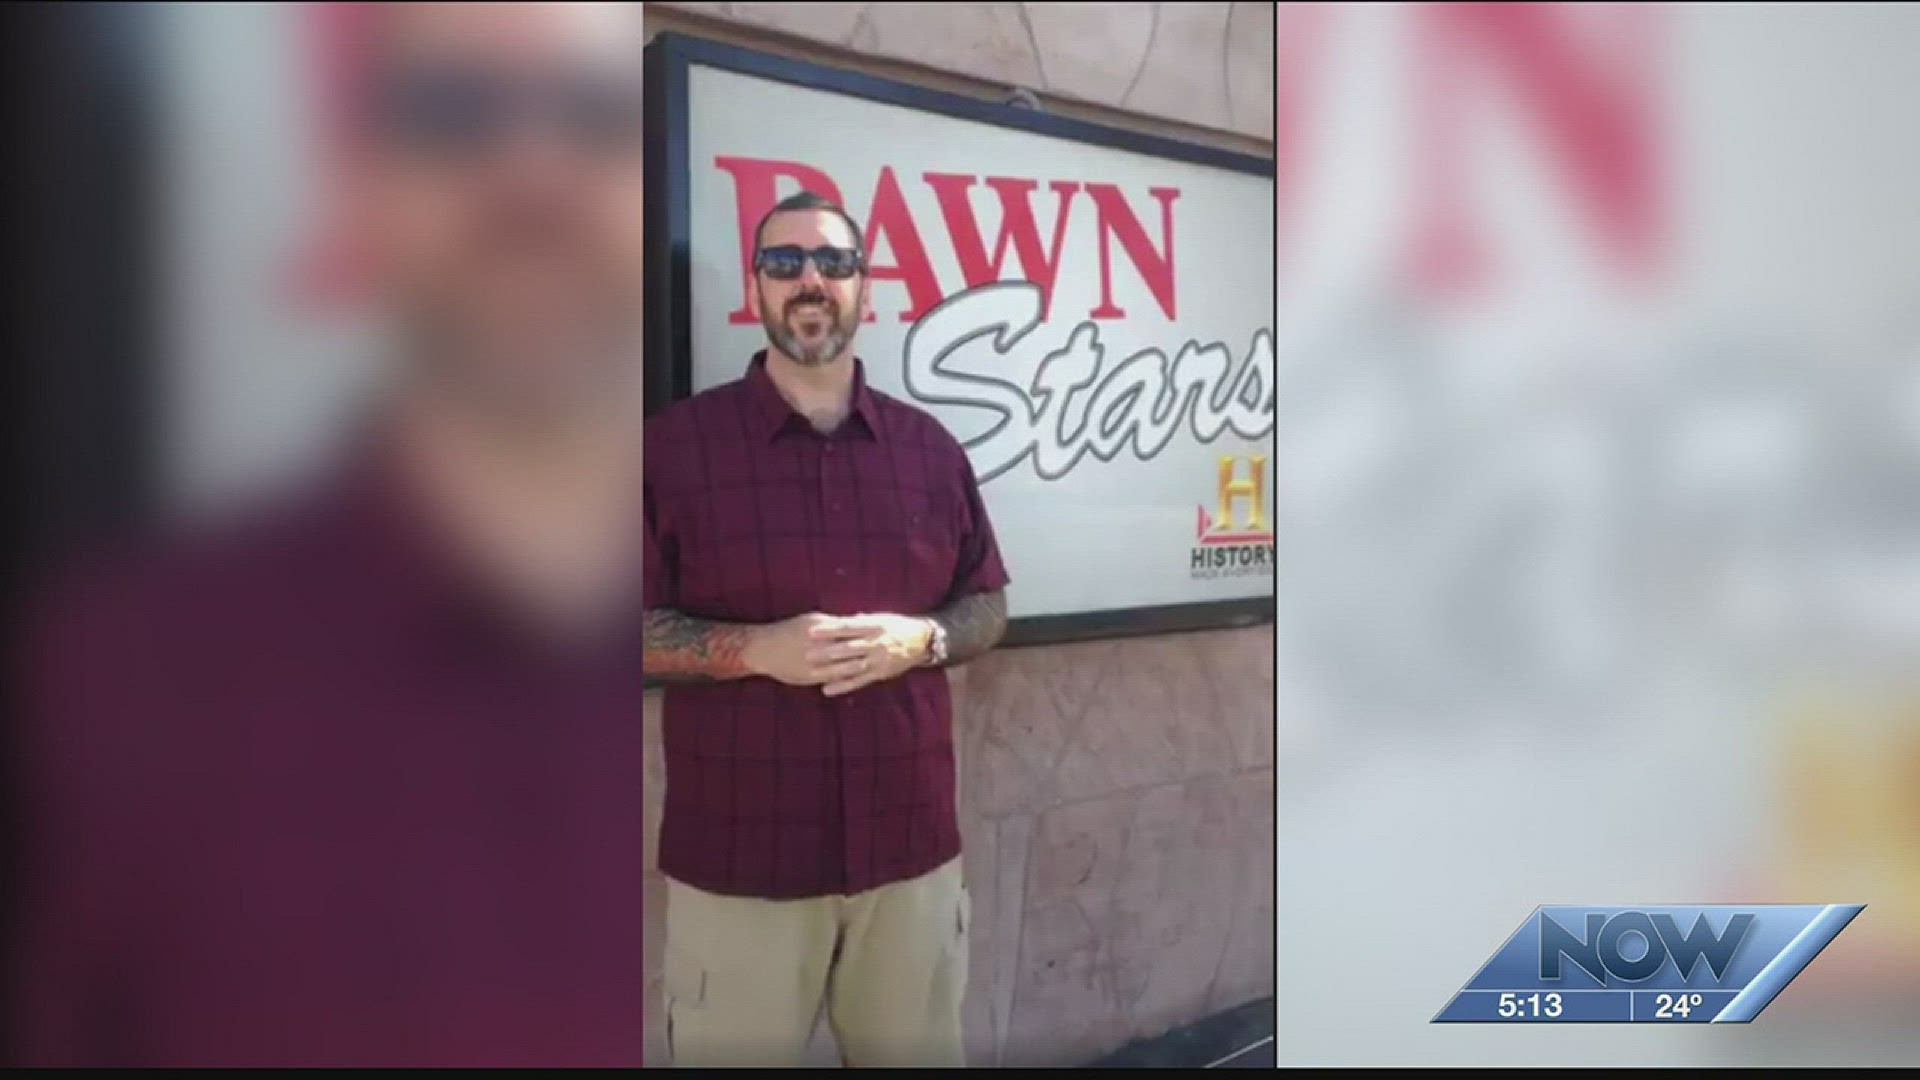 NOW: Pawn Stars visits Maine shop